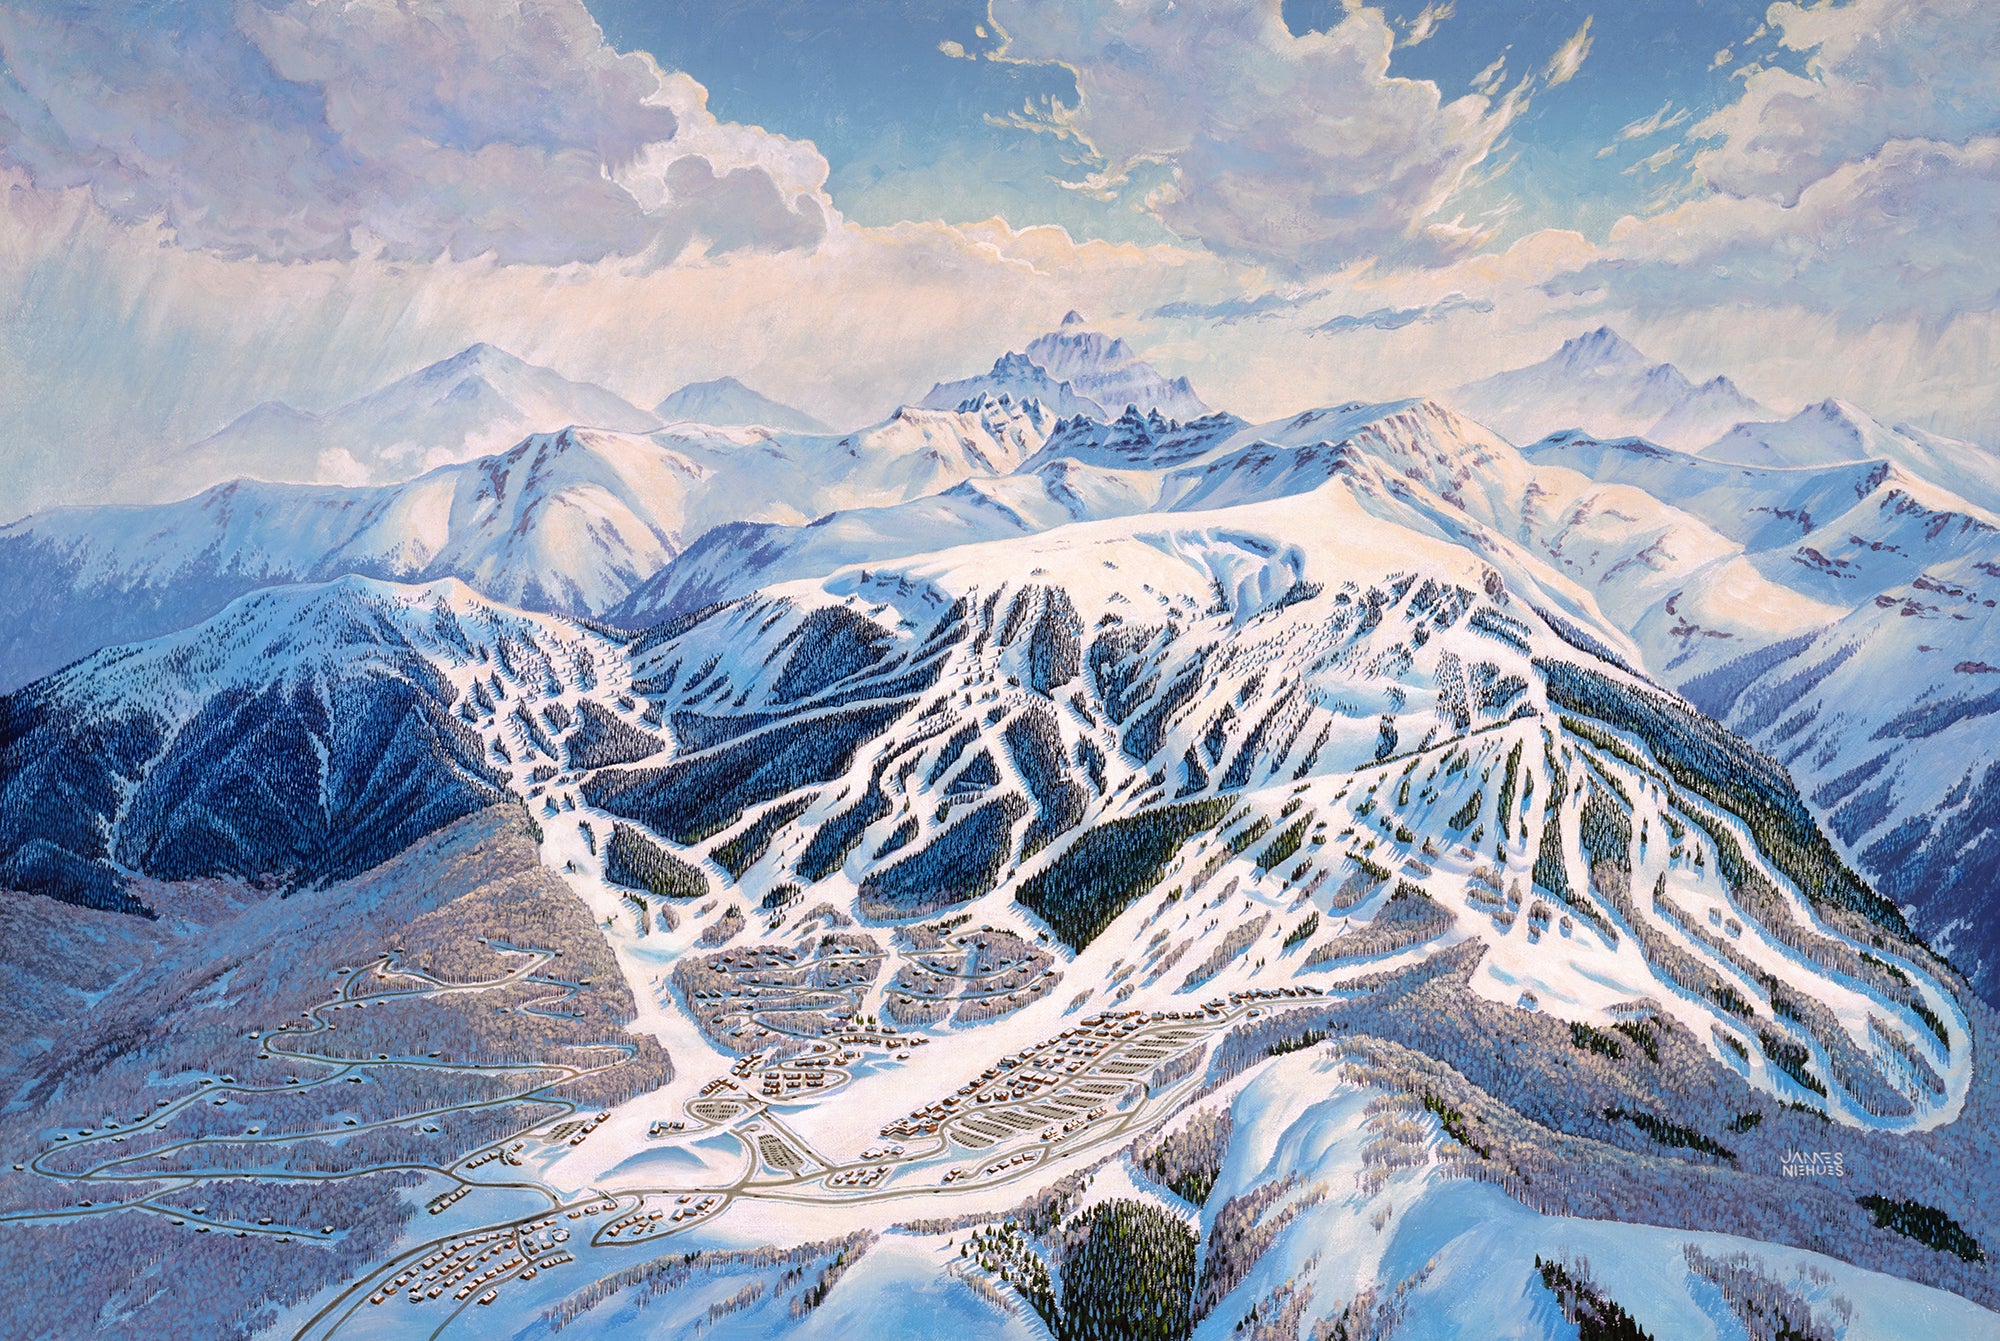 Signed Limited Edition 1991 Snowmass Canvas